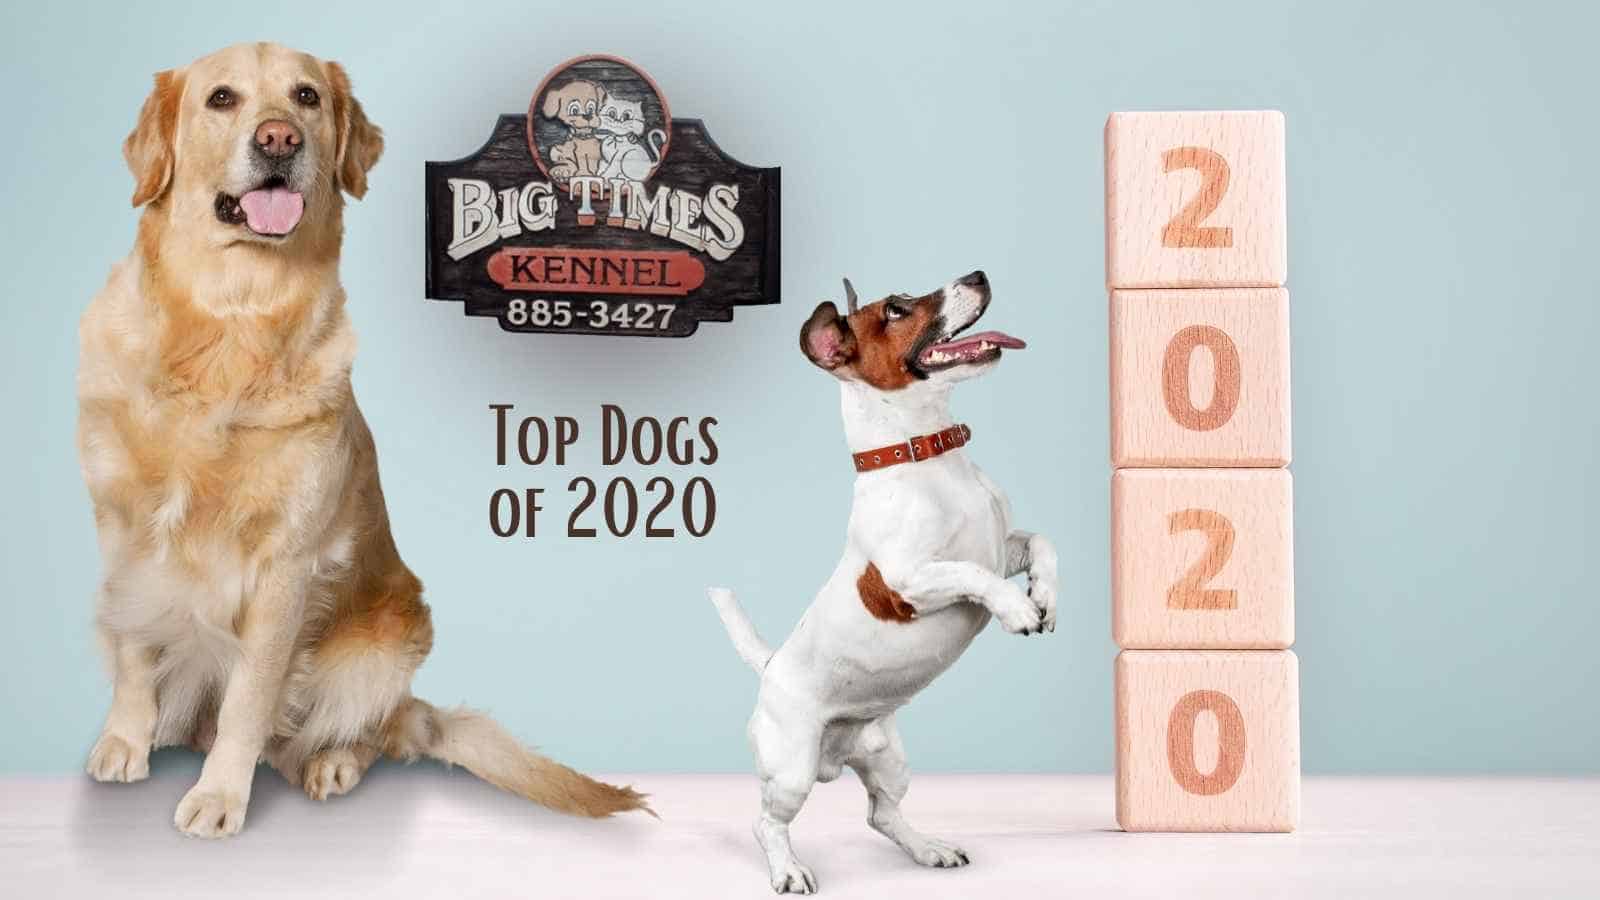 Top Dogs of 2020